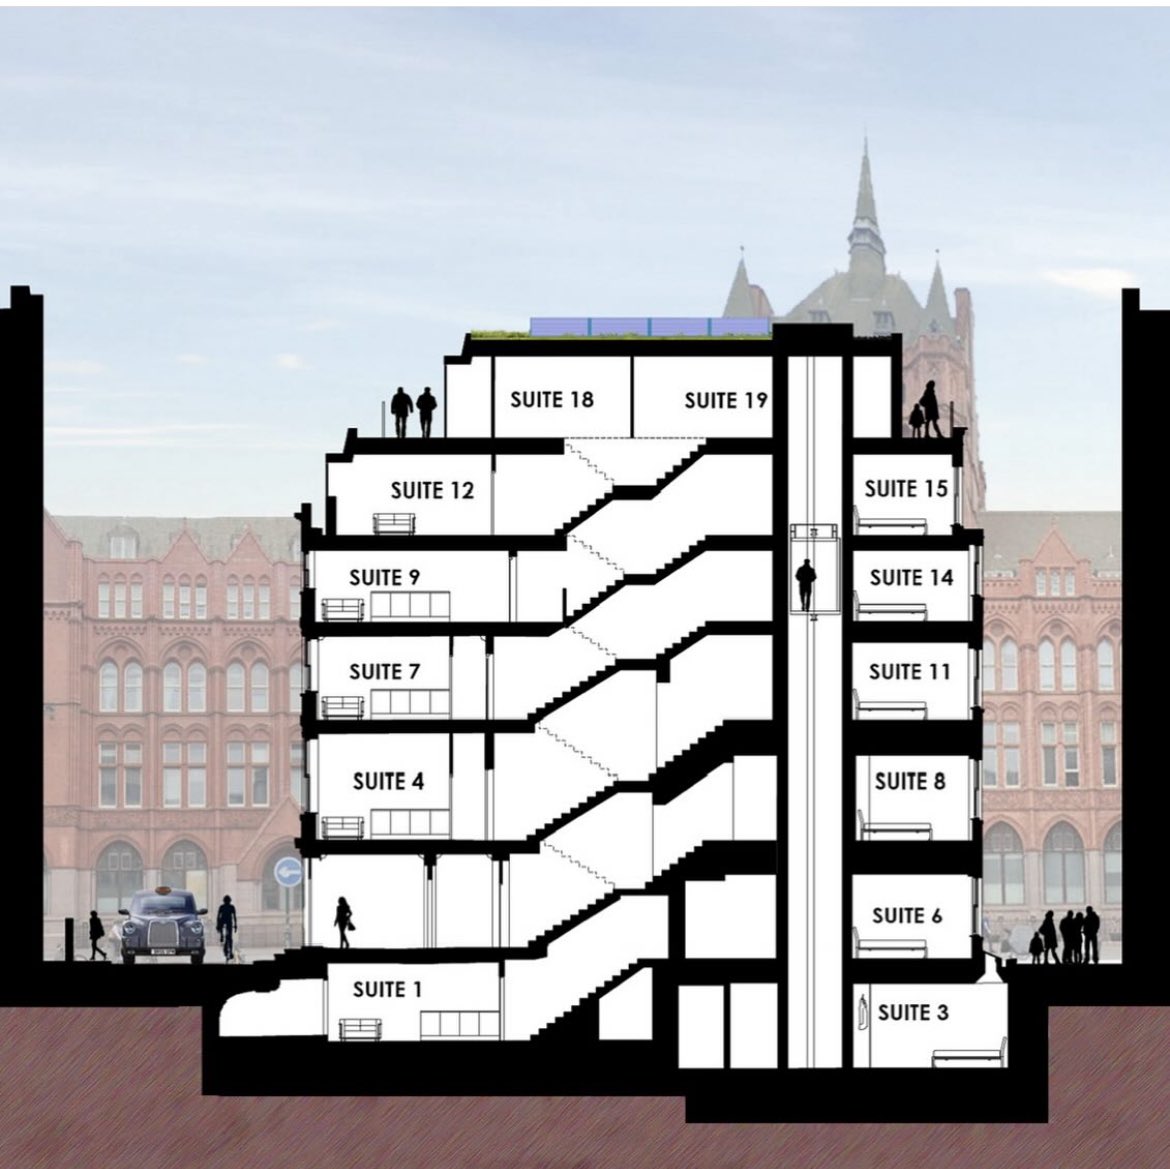 Aparthotel, Chancery Lane…planning pre-application submitted for this 20 suite hotel in a tardis like townhouse in The City of London. 

#hotel #aparthotel #chancerylane #centralline #cityoflondon #EC4 #london #londonlife #londonarchitect #architect #architecture